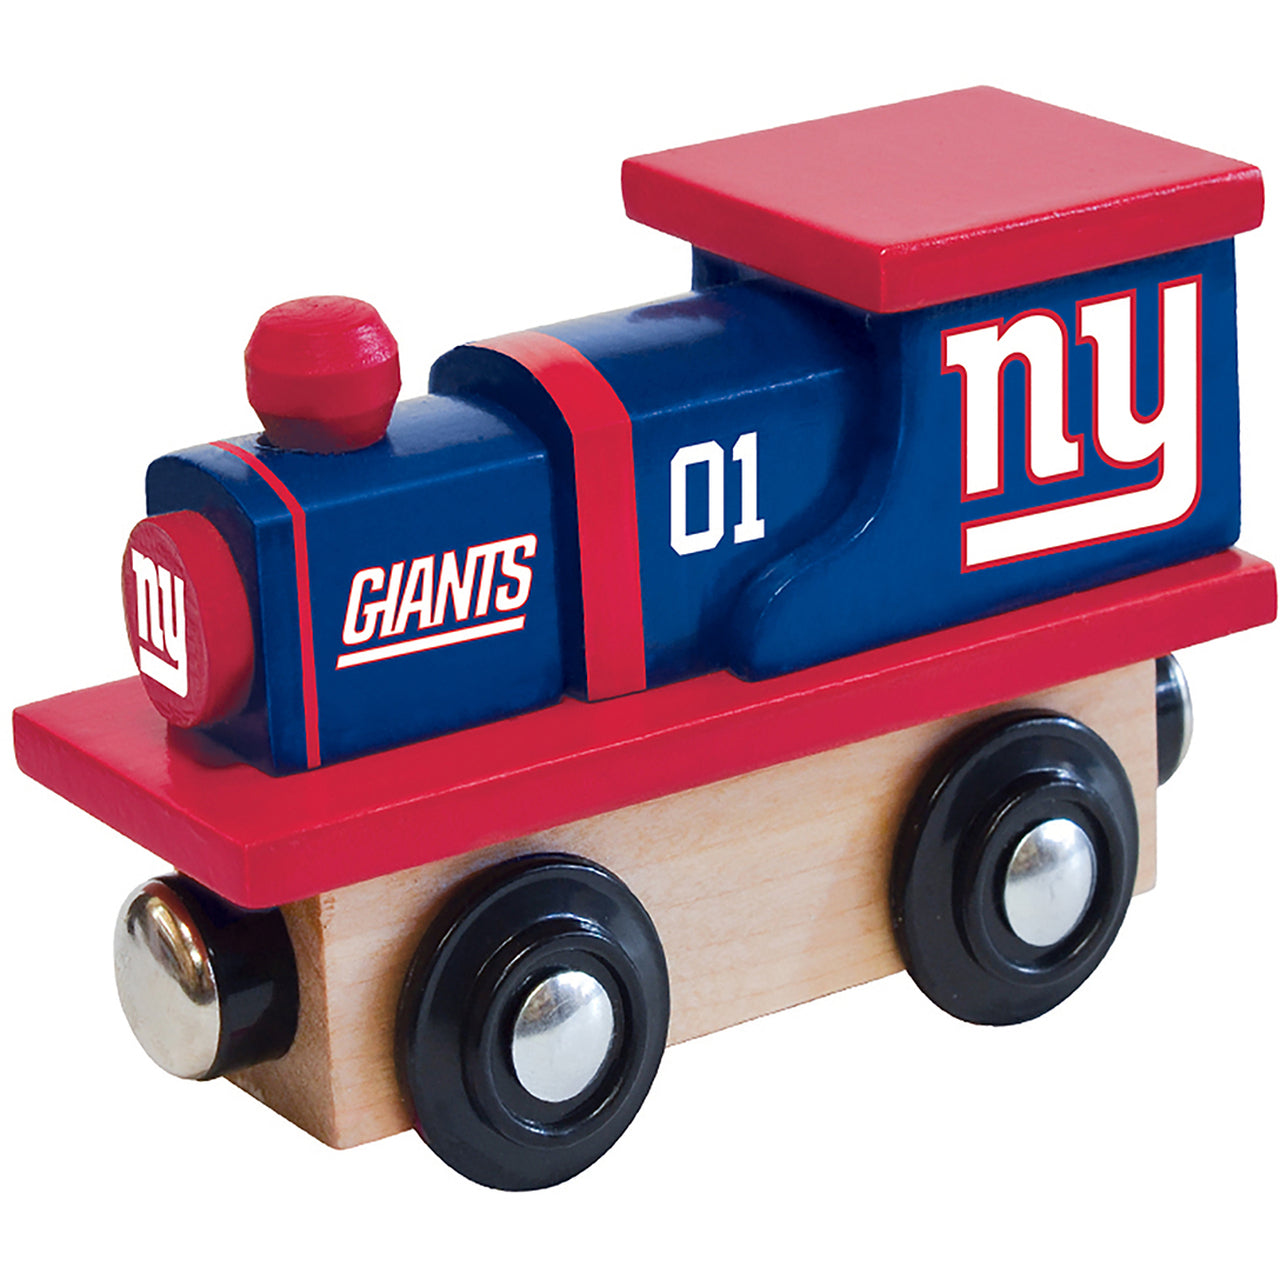 New York Giants Wooden Toy Train Engine by Masterpieces